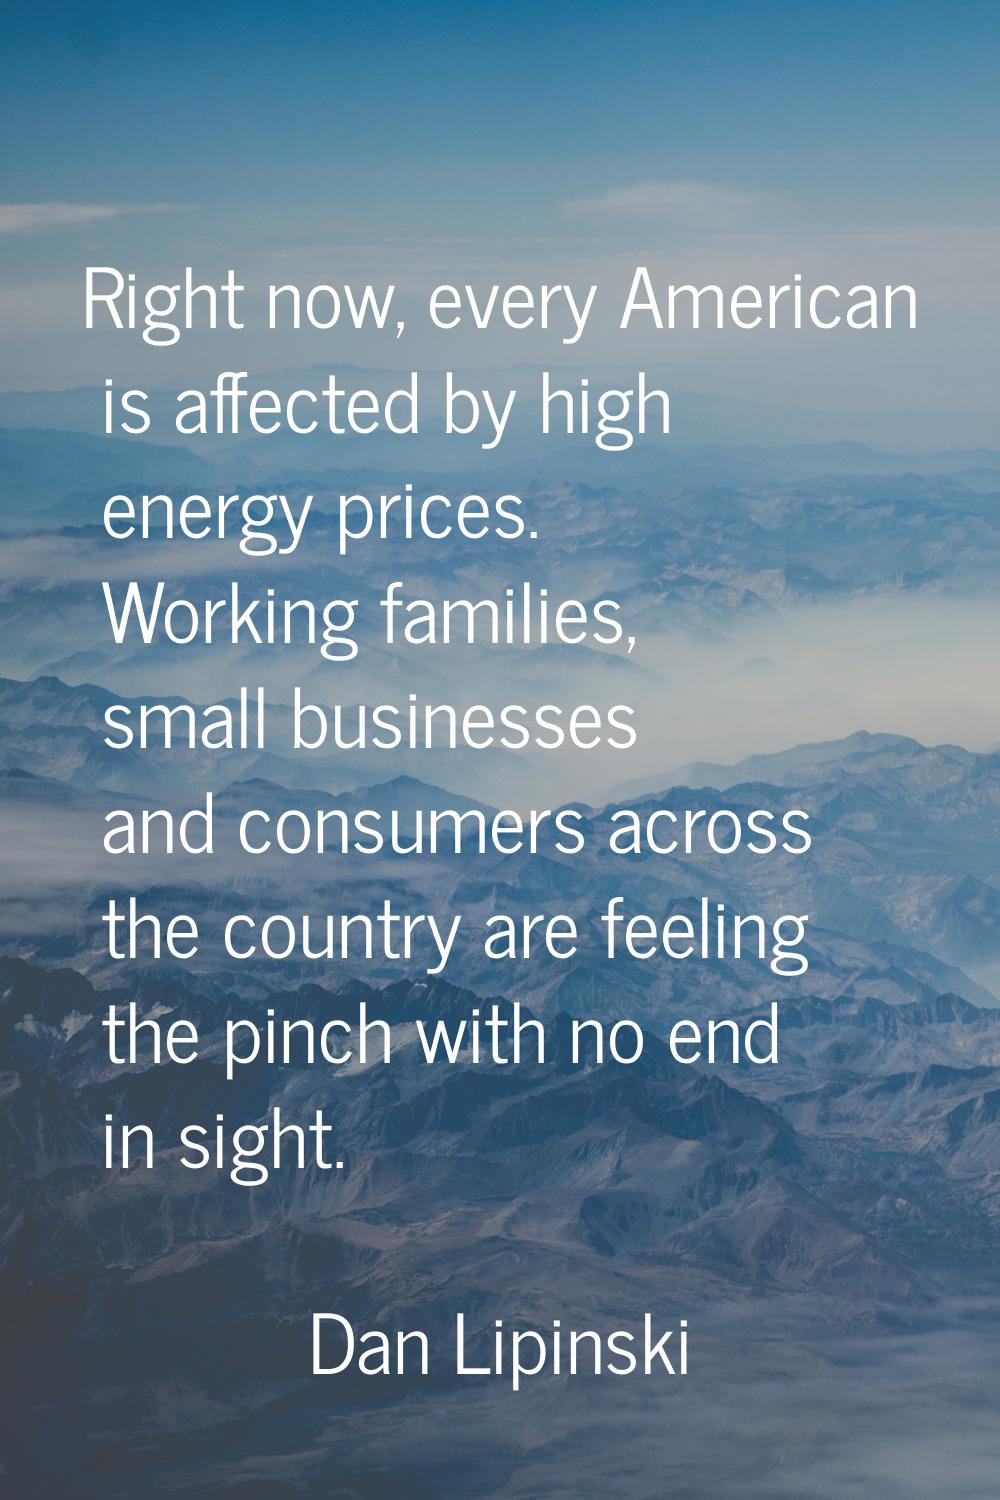 Right now, every American is affected by high energy prices. Working families, small businesses and